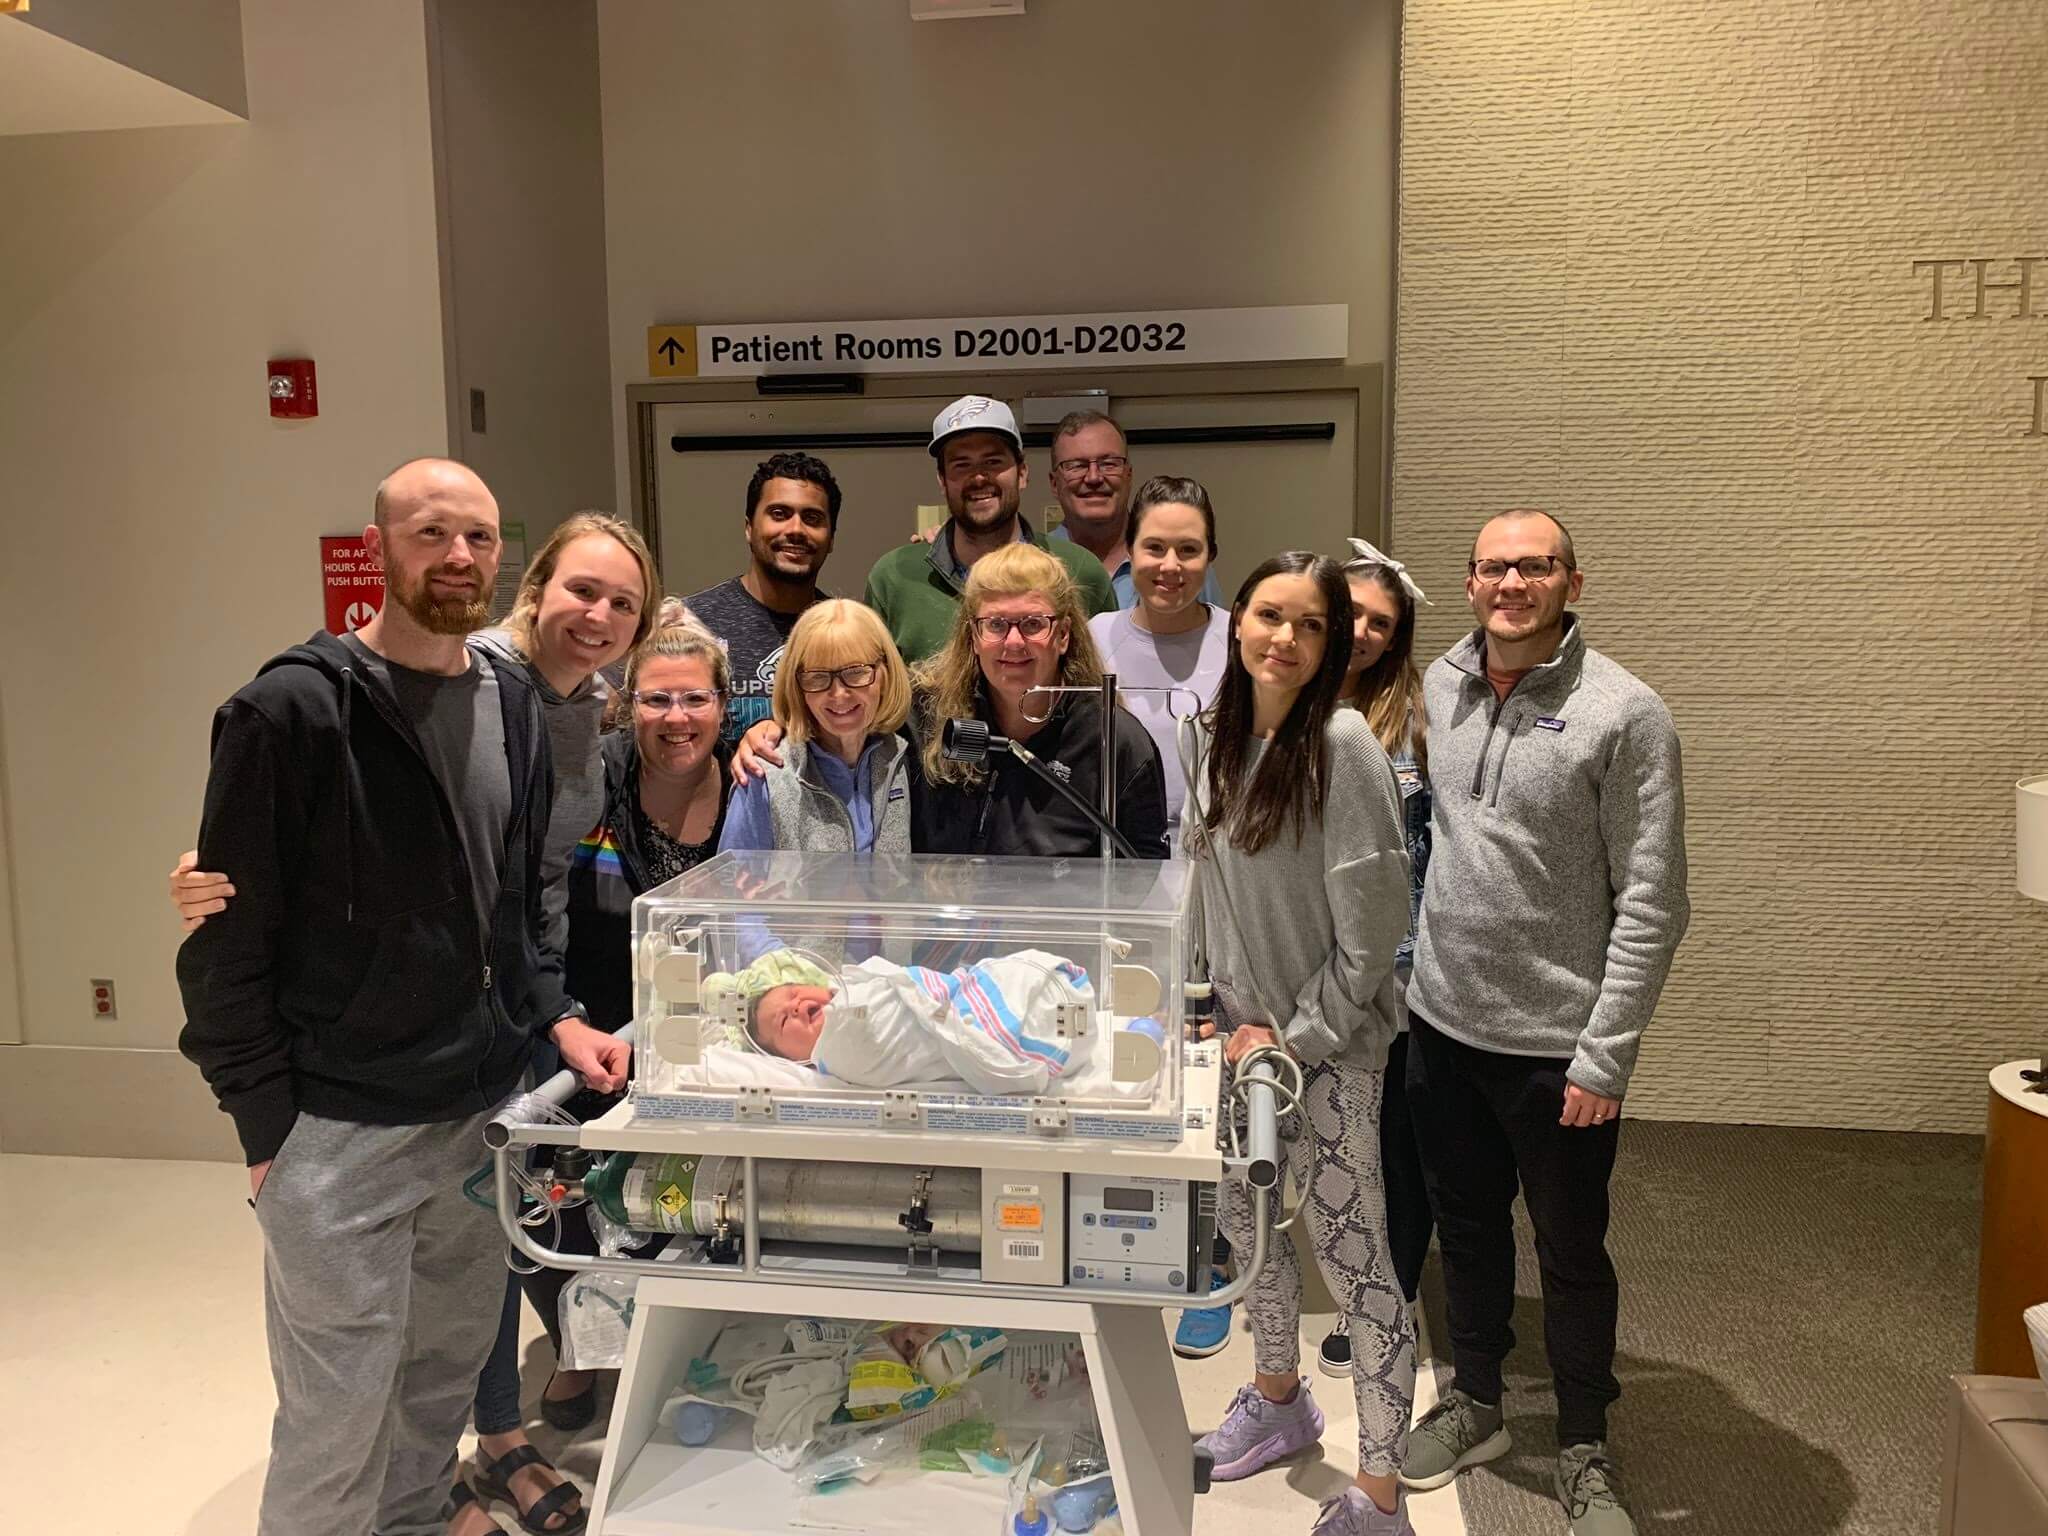 Family with baby Cal in the hospital